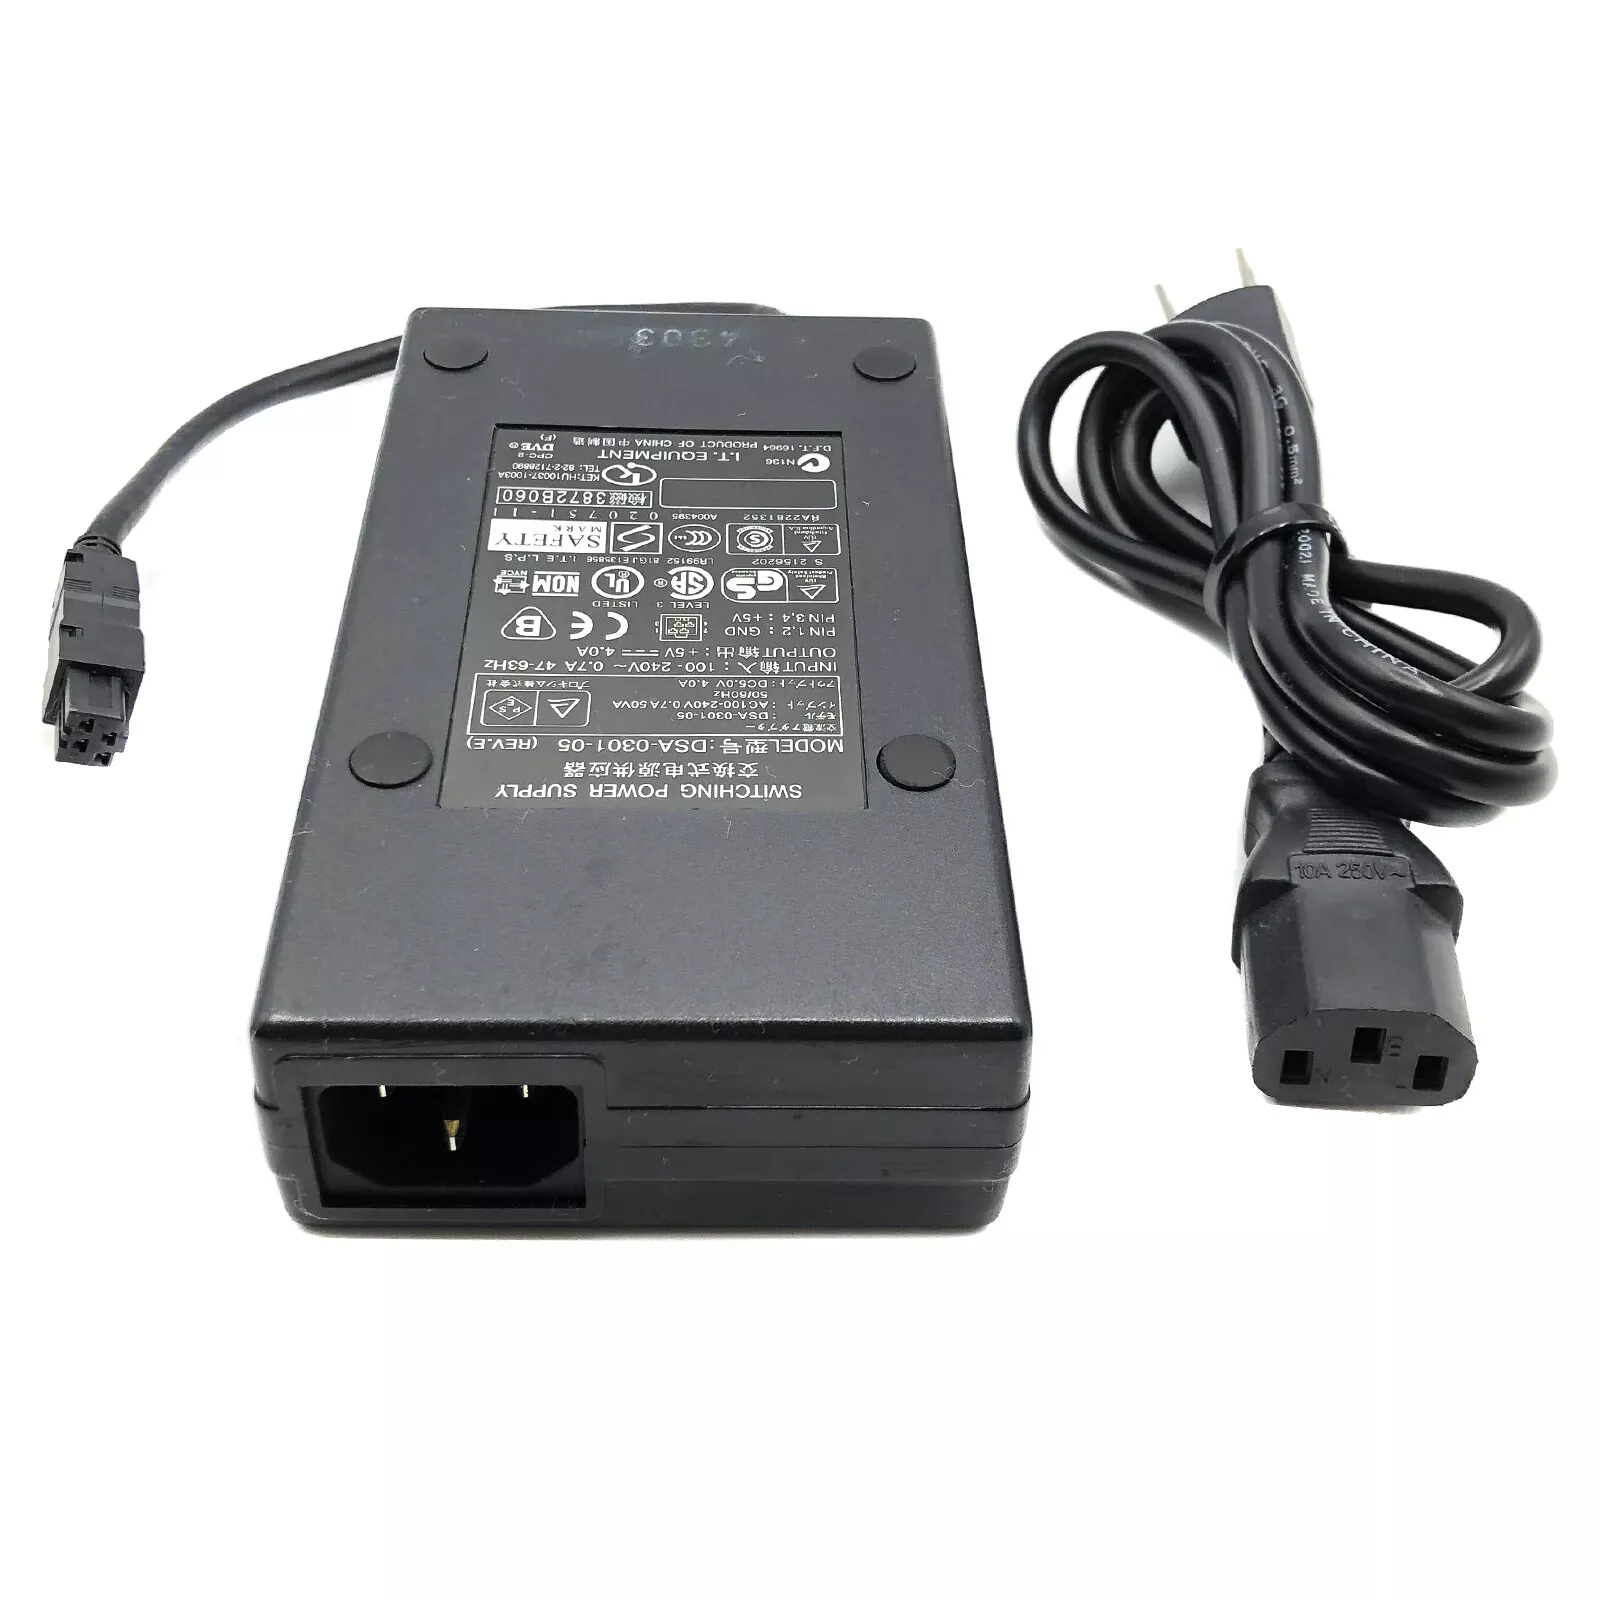 *Brand NEW*Genuine DVE +5V 4A 20W Switching AC ADAPTER Model DSA-0301-05 Power Supply - Click Image to Close